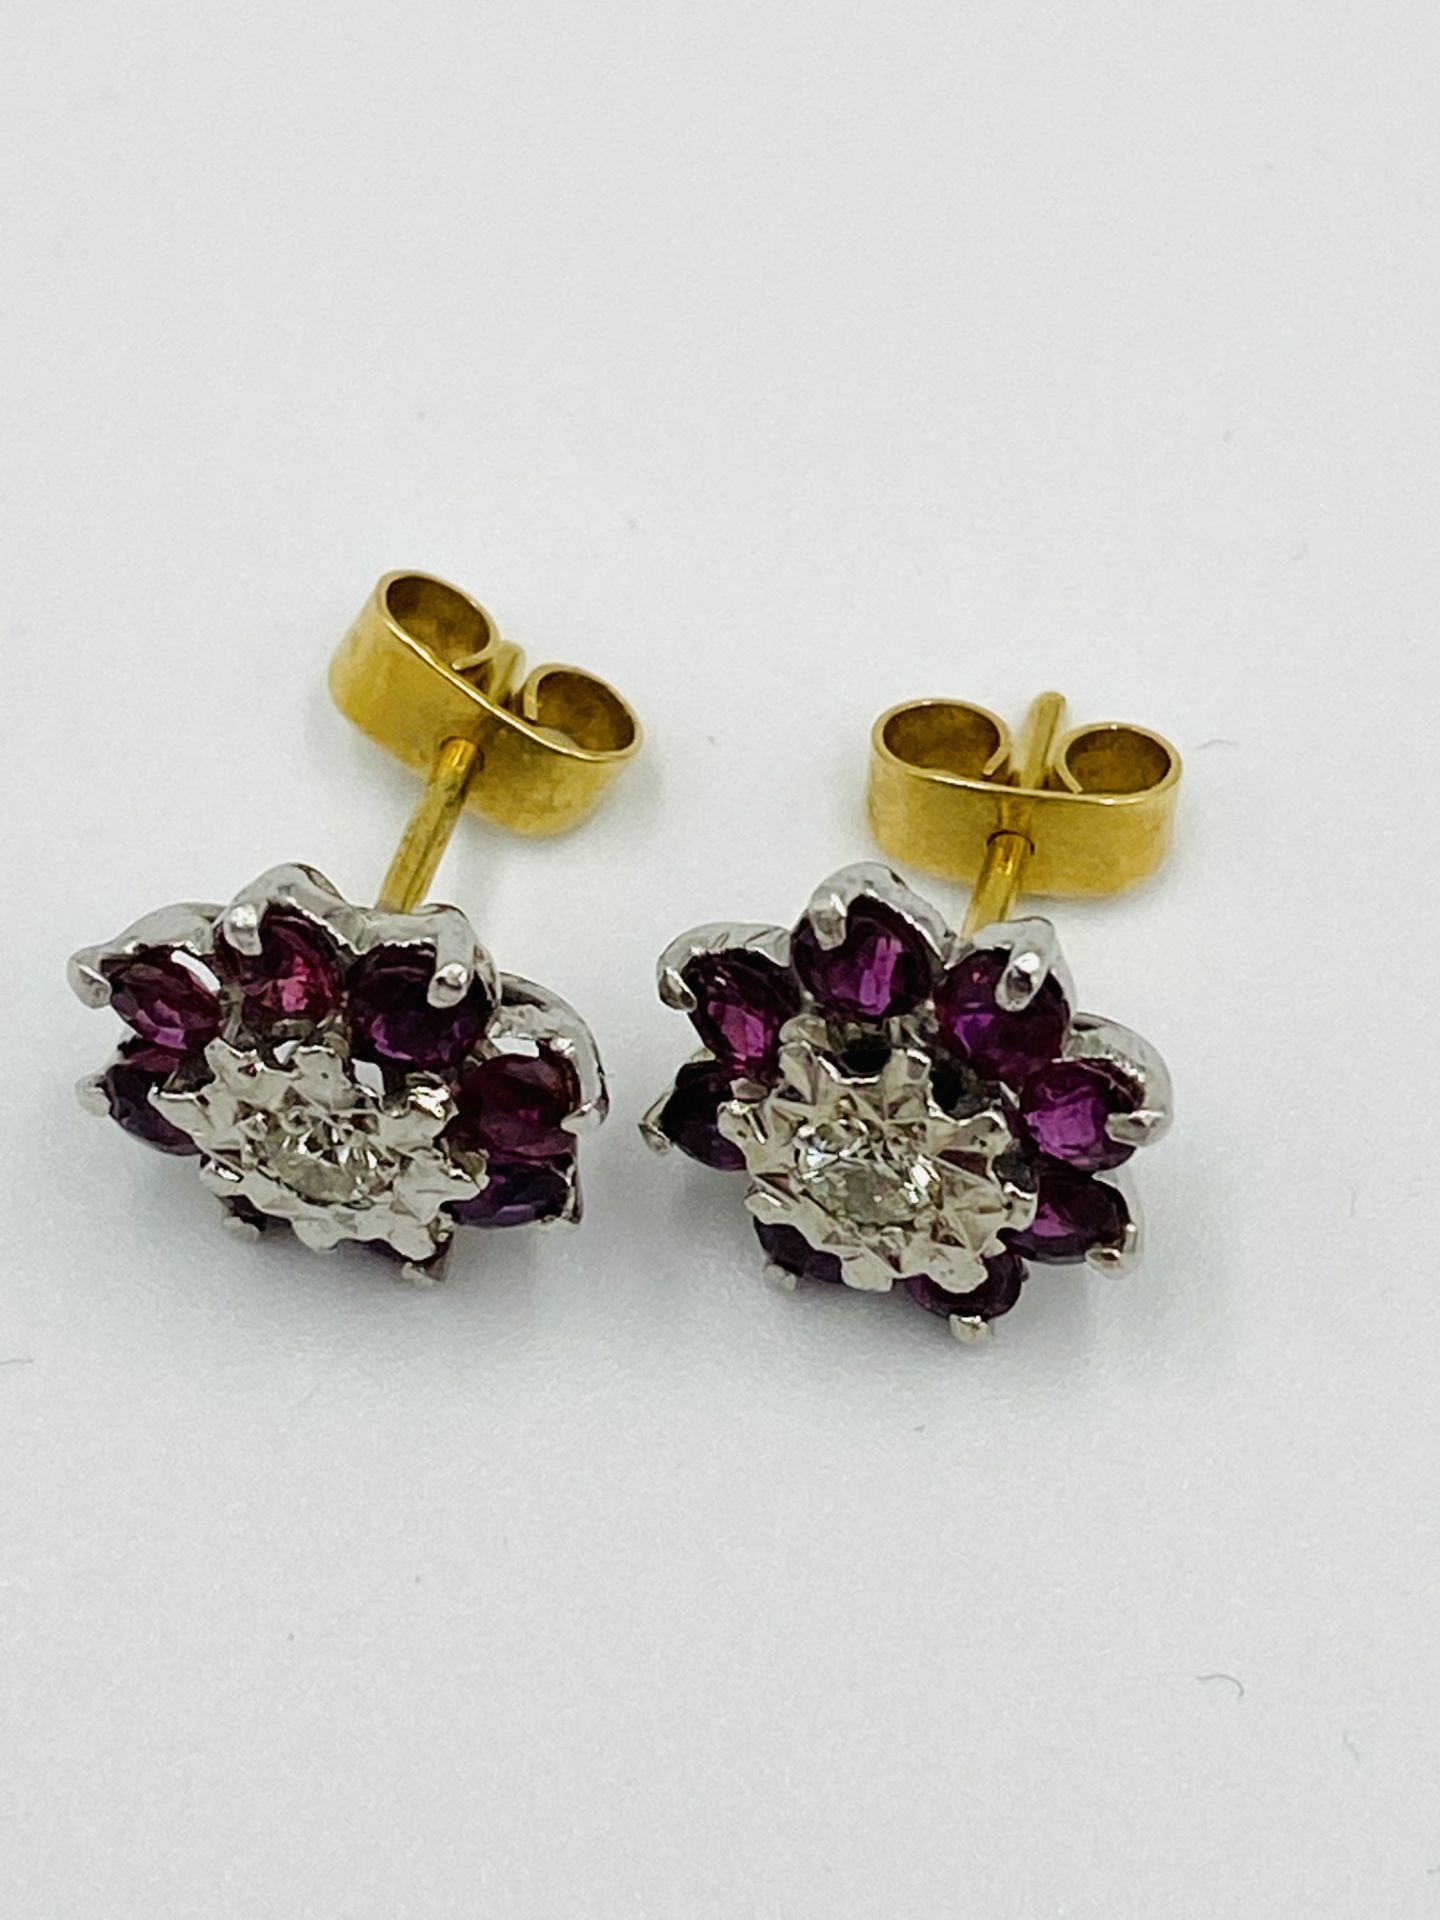 Pair of 18ct gold, diamond and ruby earrings - Image 4 of 4